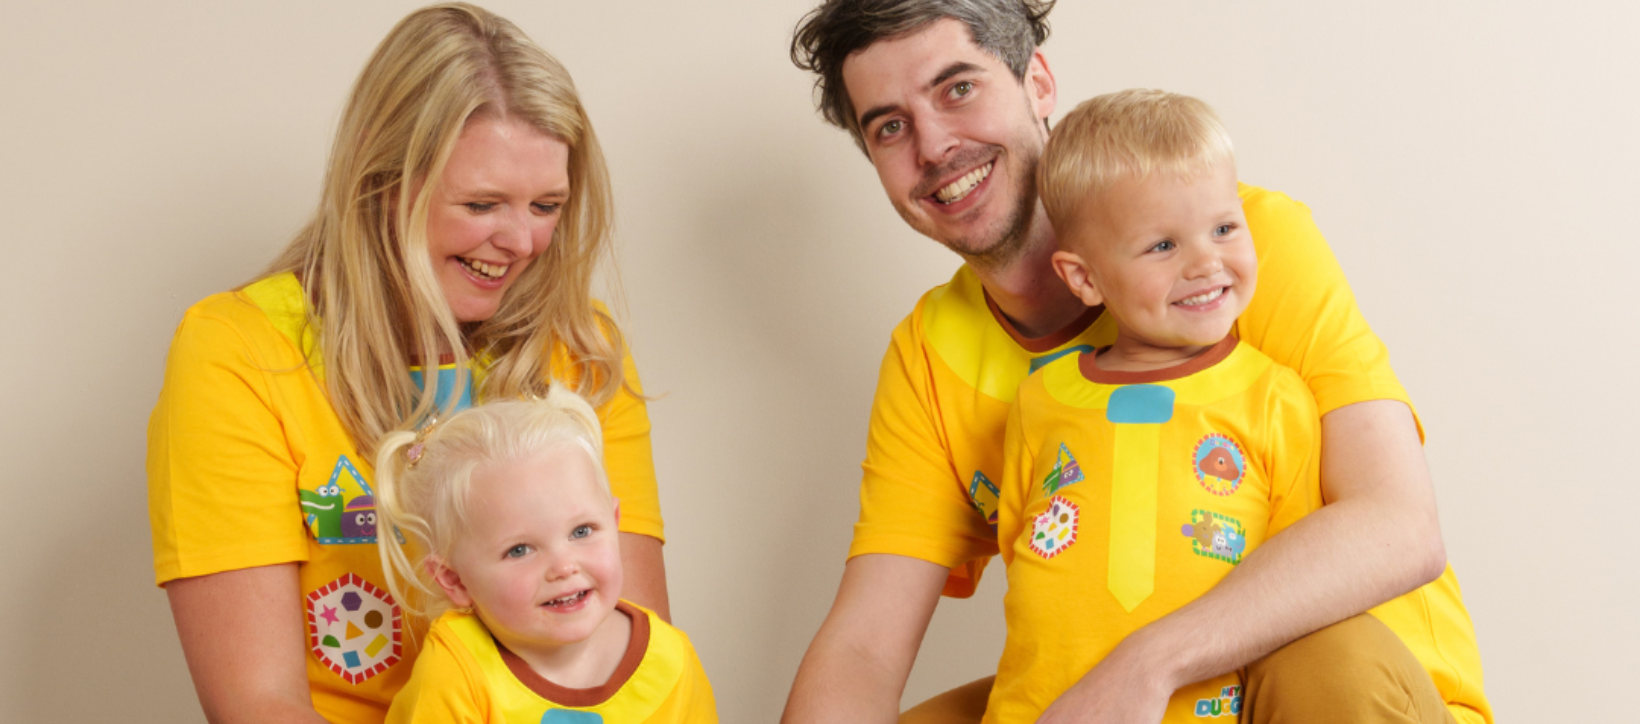 Matching Family Pyjamas Are The New Way To Bond As A Family. Here Are Five Reasons Why.